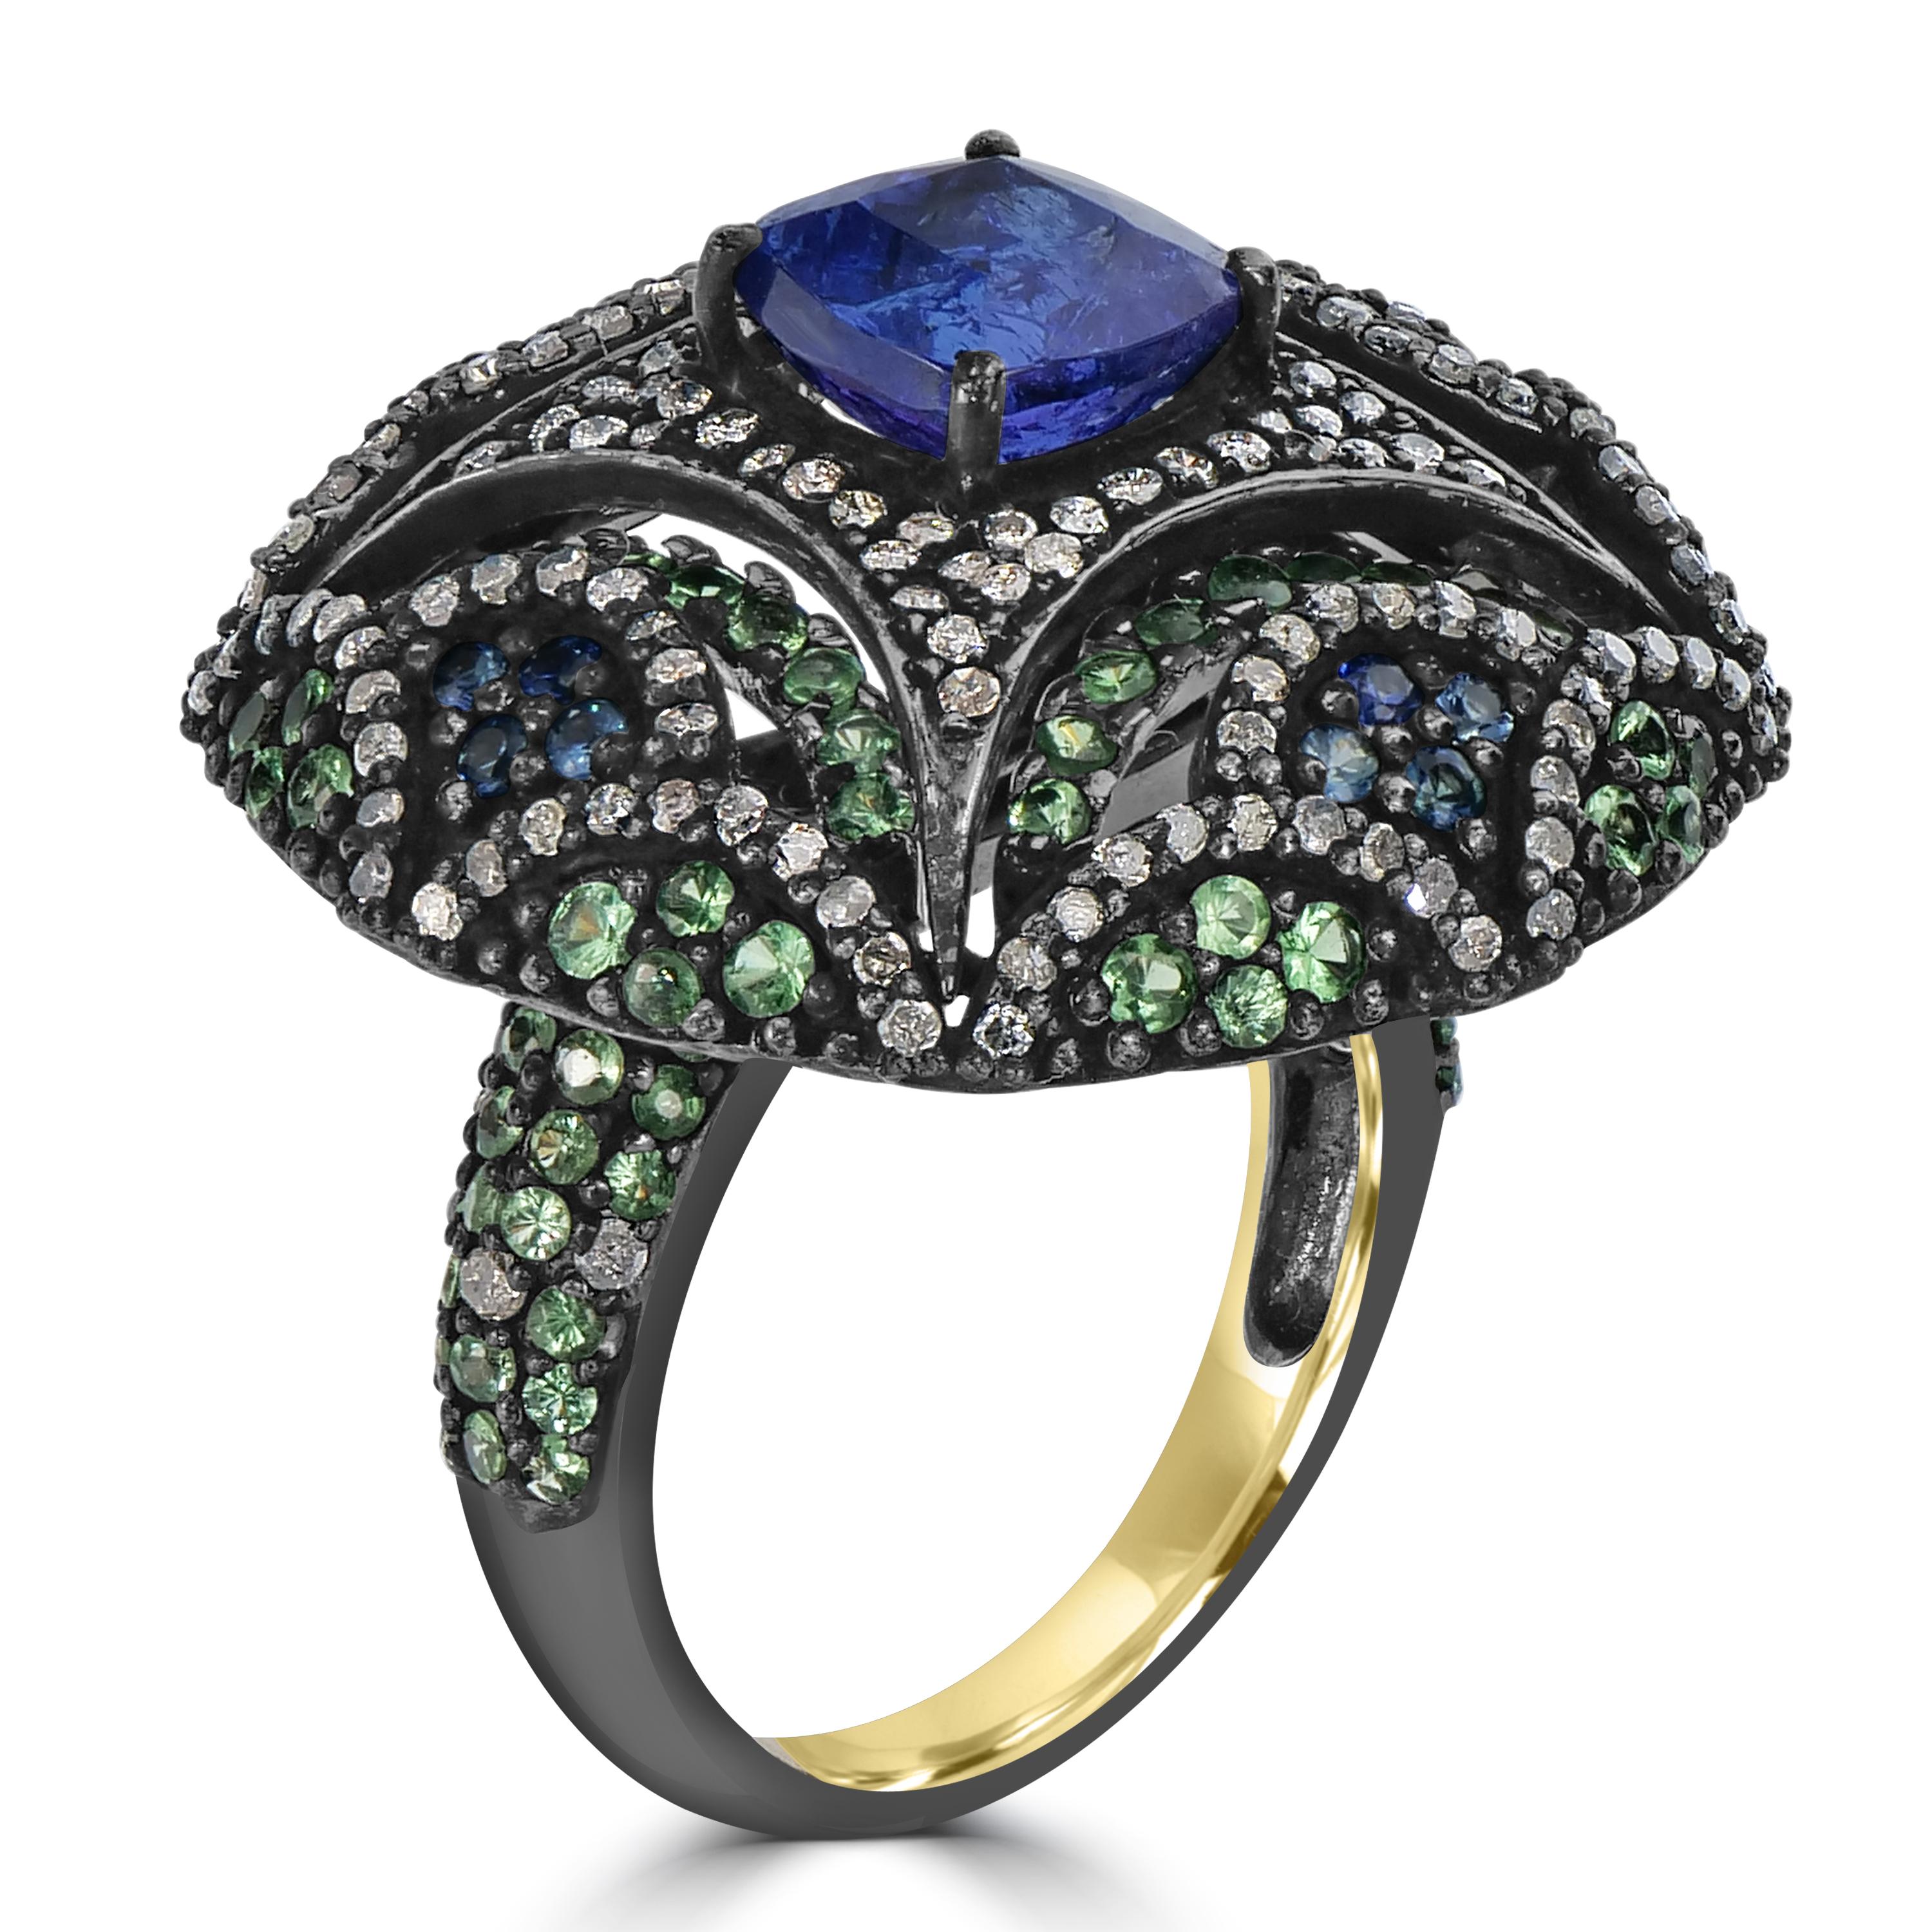 Step into the opulent world of the Victorian 5.72 Cttw. Tanzanite, Sapphire, Tsavorite, and Diamond Cocktail Ring — a harmonious blend of vintage charm and contemporary sophistication. At its heart, a resplendent tanzanite takes center stage,